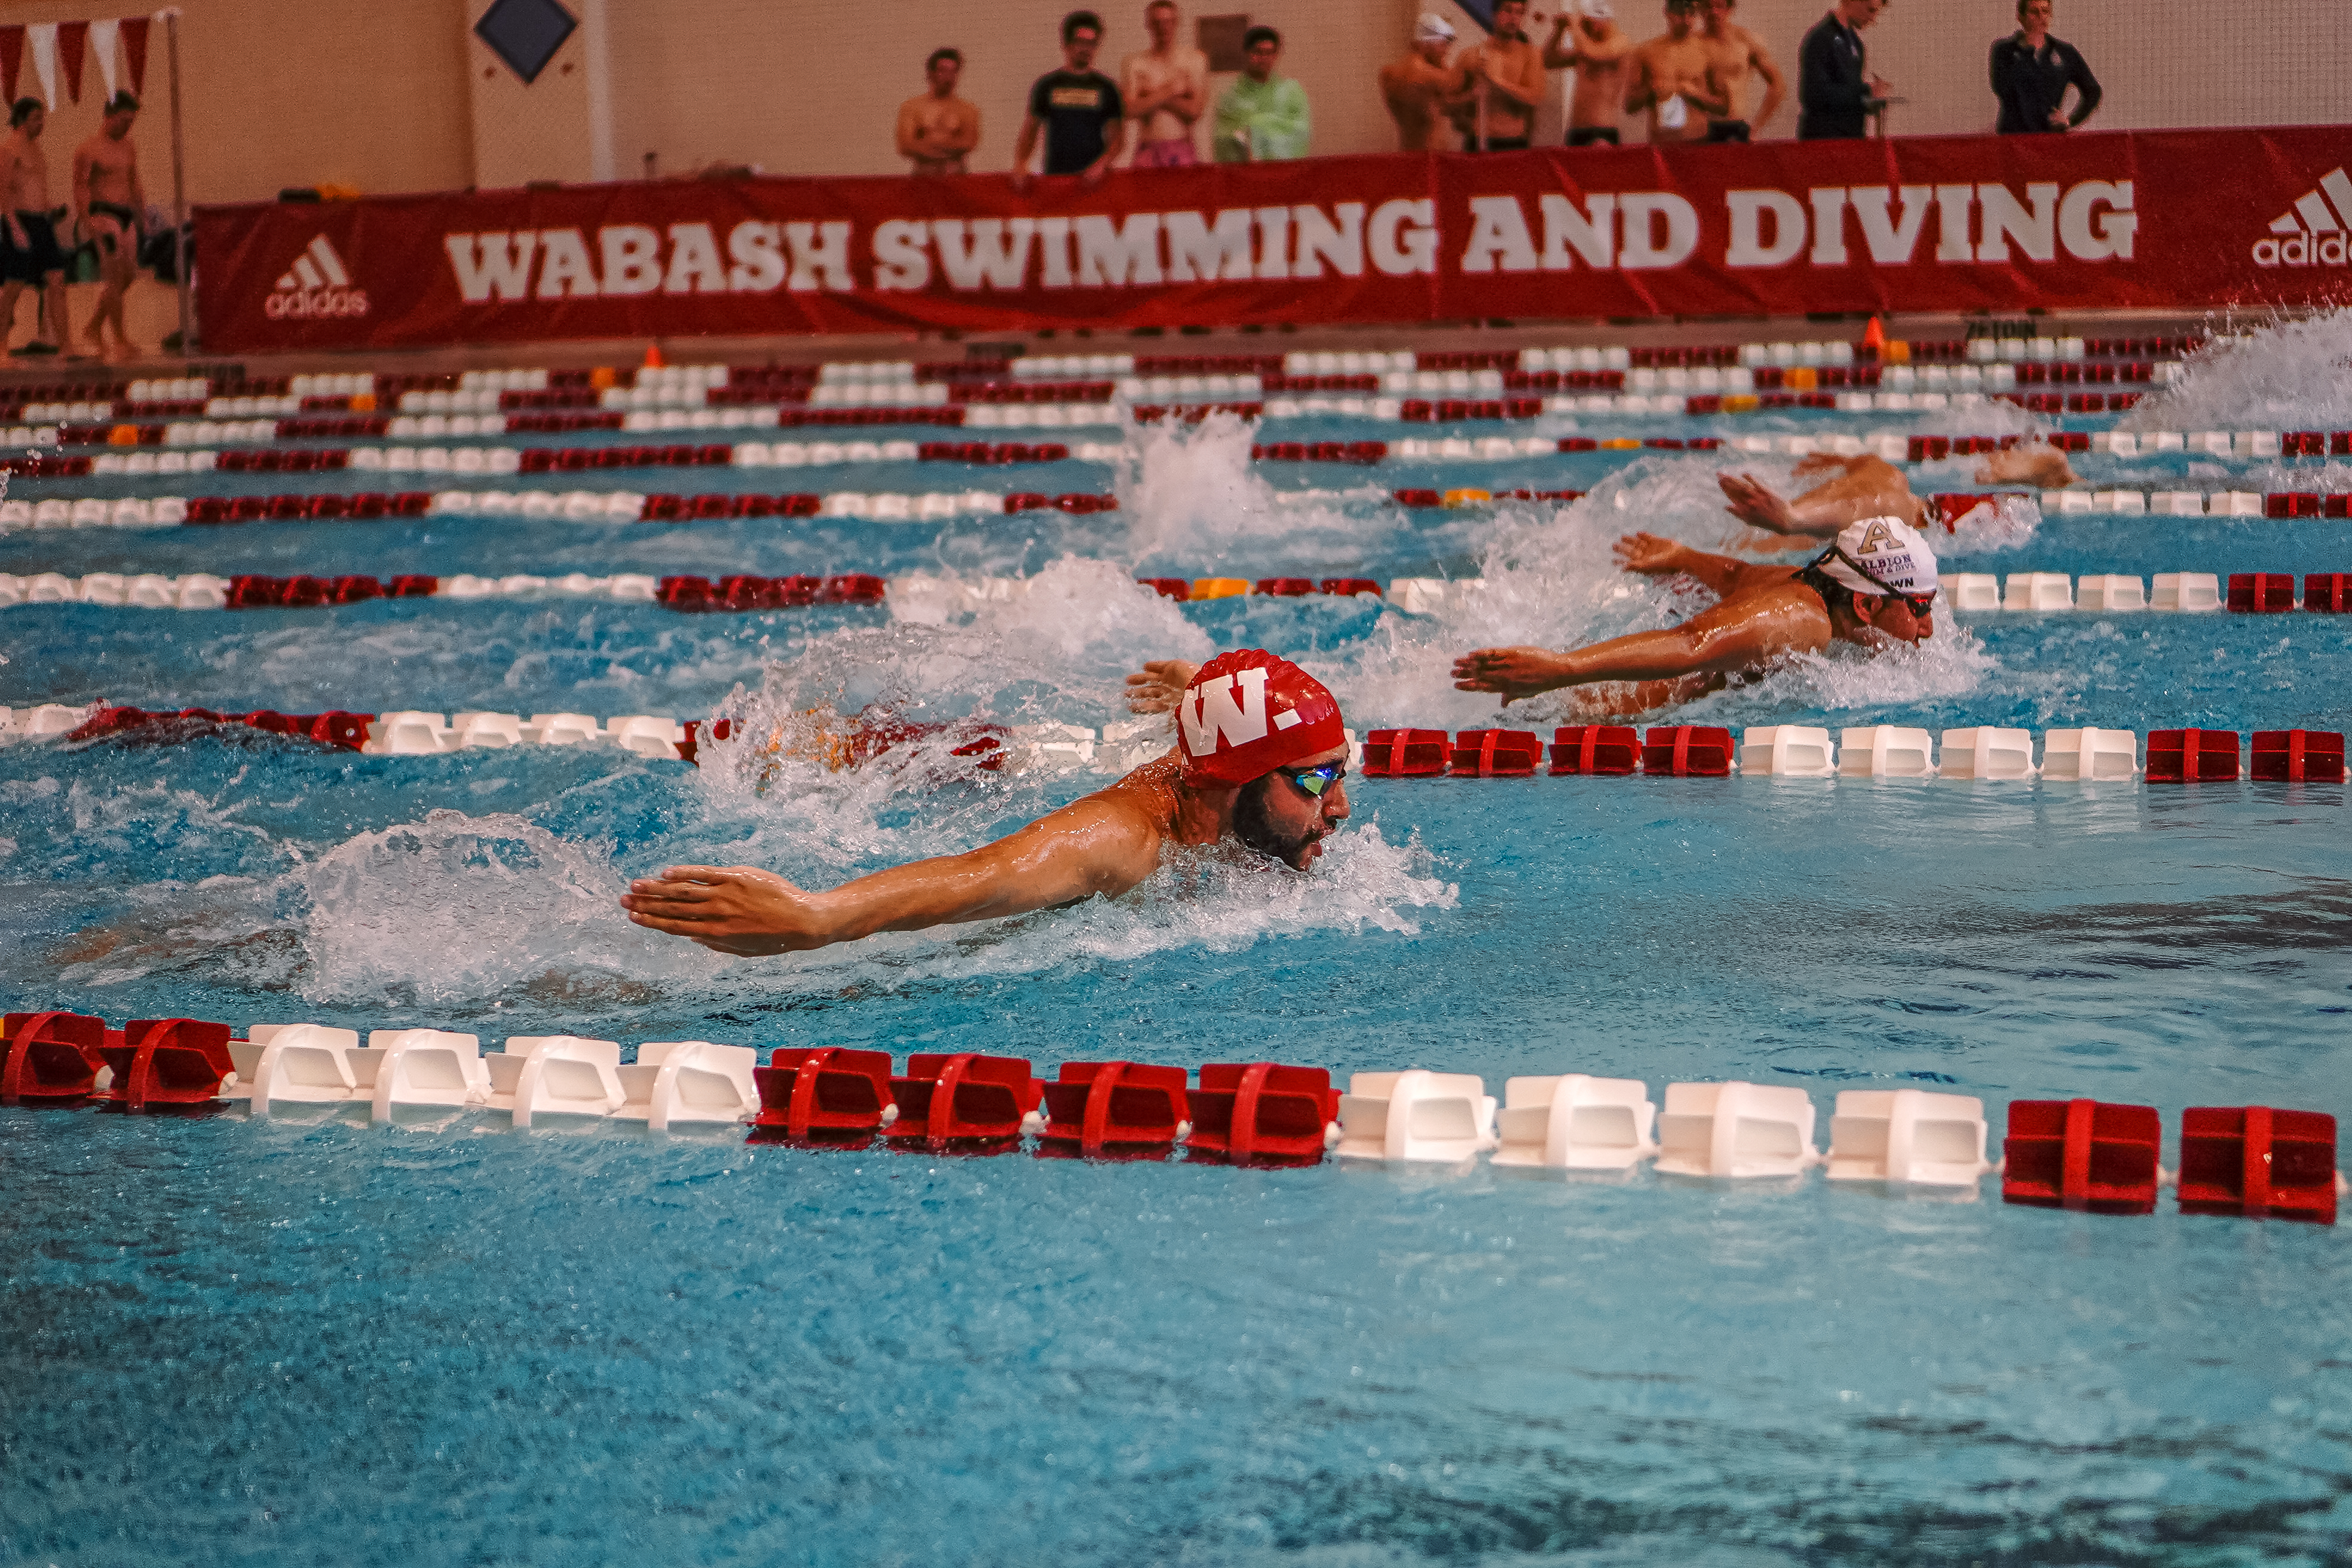 El-Khalili, a distance swimmer, has lettered all four years he’s been a member of Wabash’s swimming and diving team. 